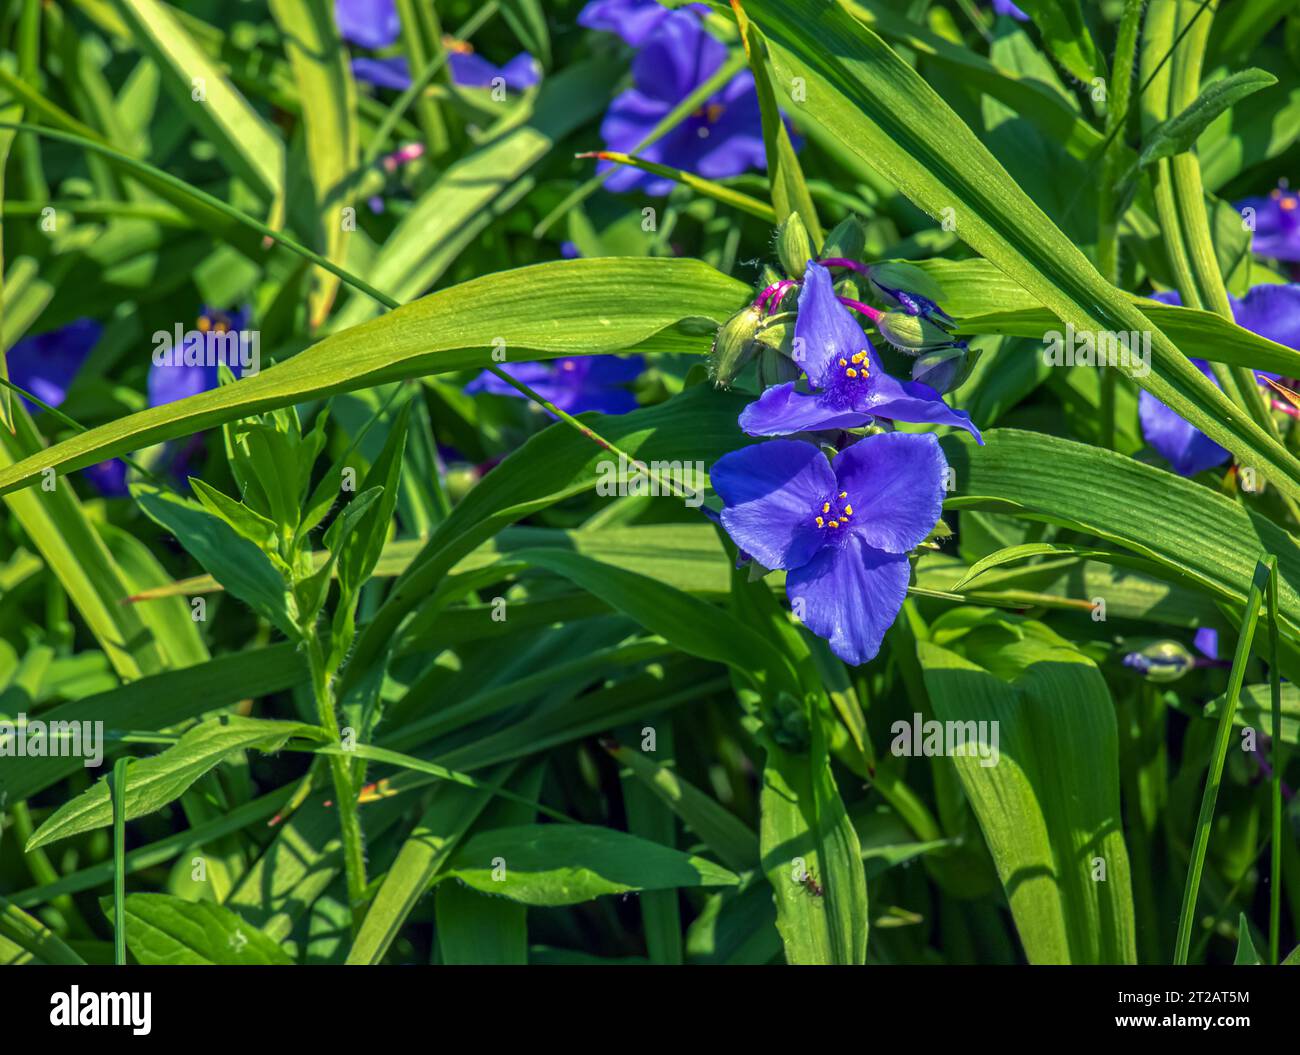 Purple three-petalled flowers of the spider web Tradescantia virginiana L. Herbaceous perennial plant. The tradescantia flower blooms on a background Stock Photo